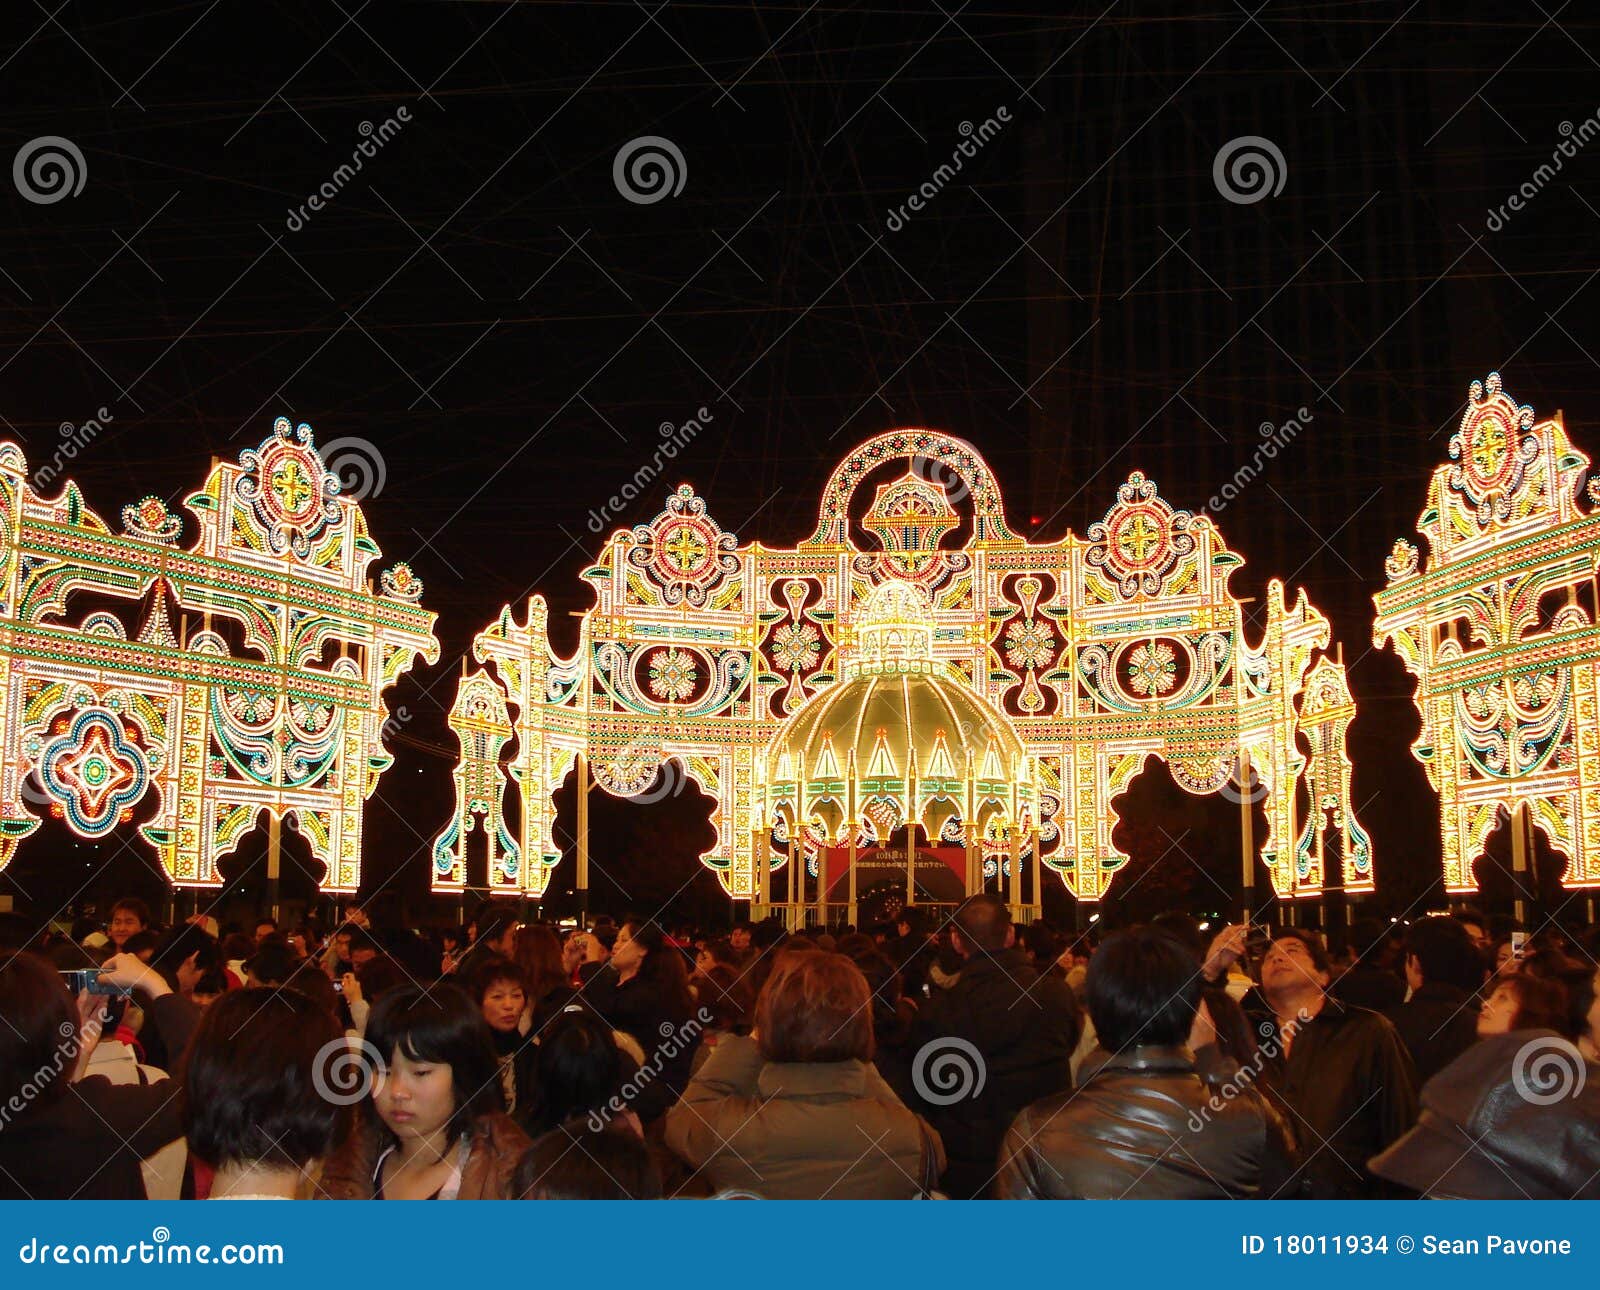 115 Luminarie Photos Free Royalty Free Stock Photos From Dreamstime